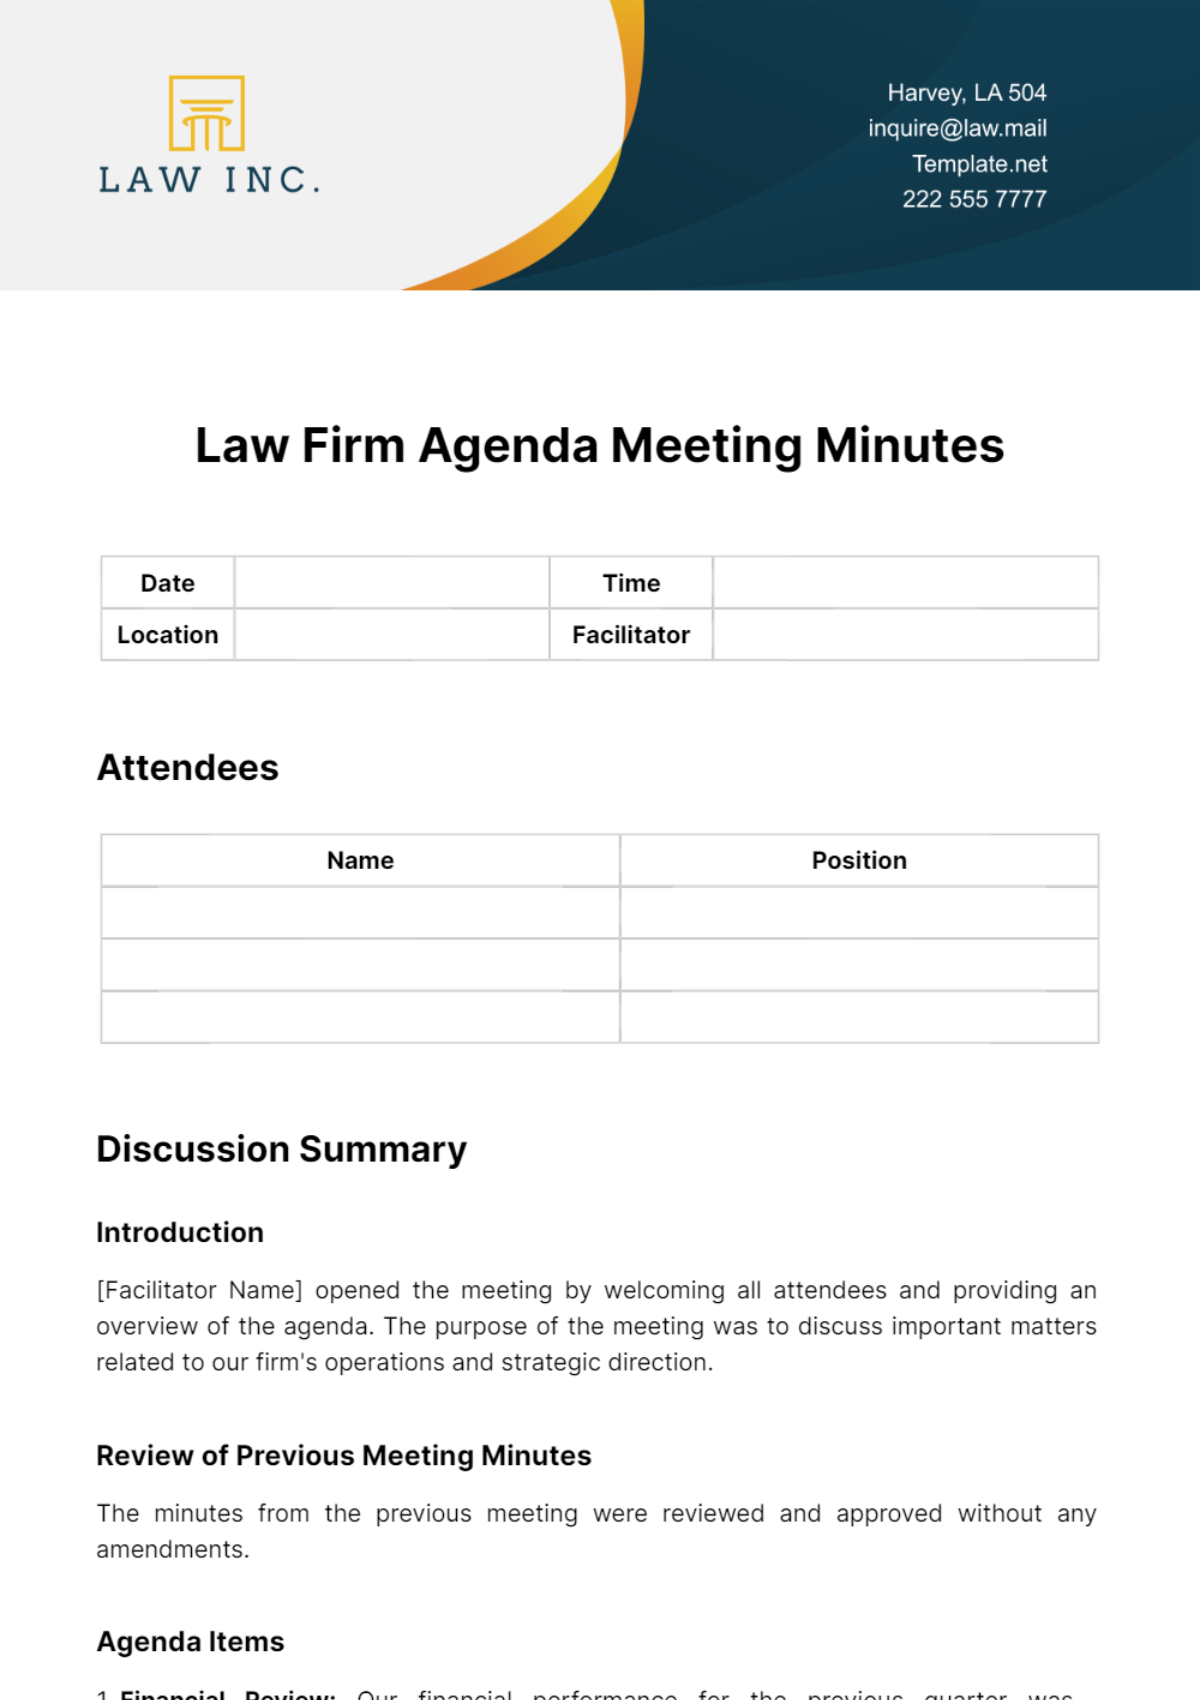 Free Law Firm Agenda Meeting Minutes Template